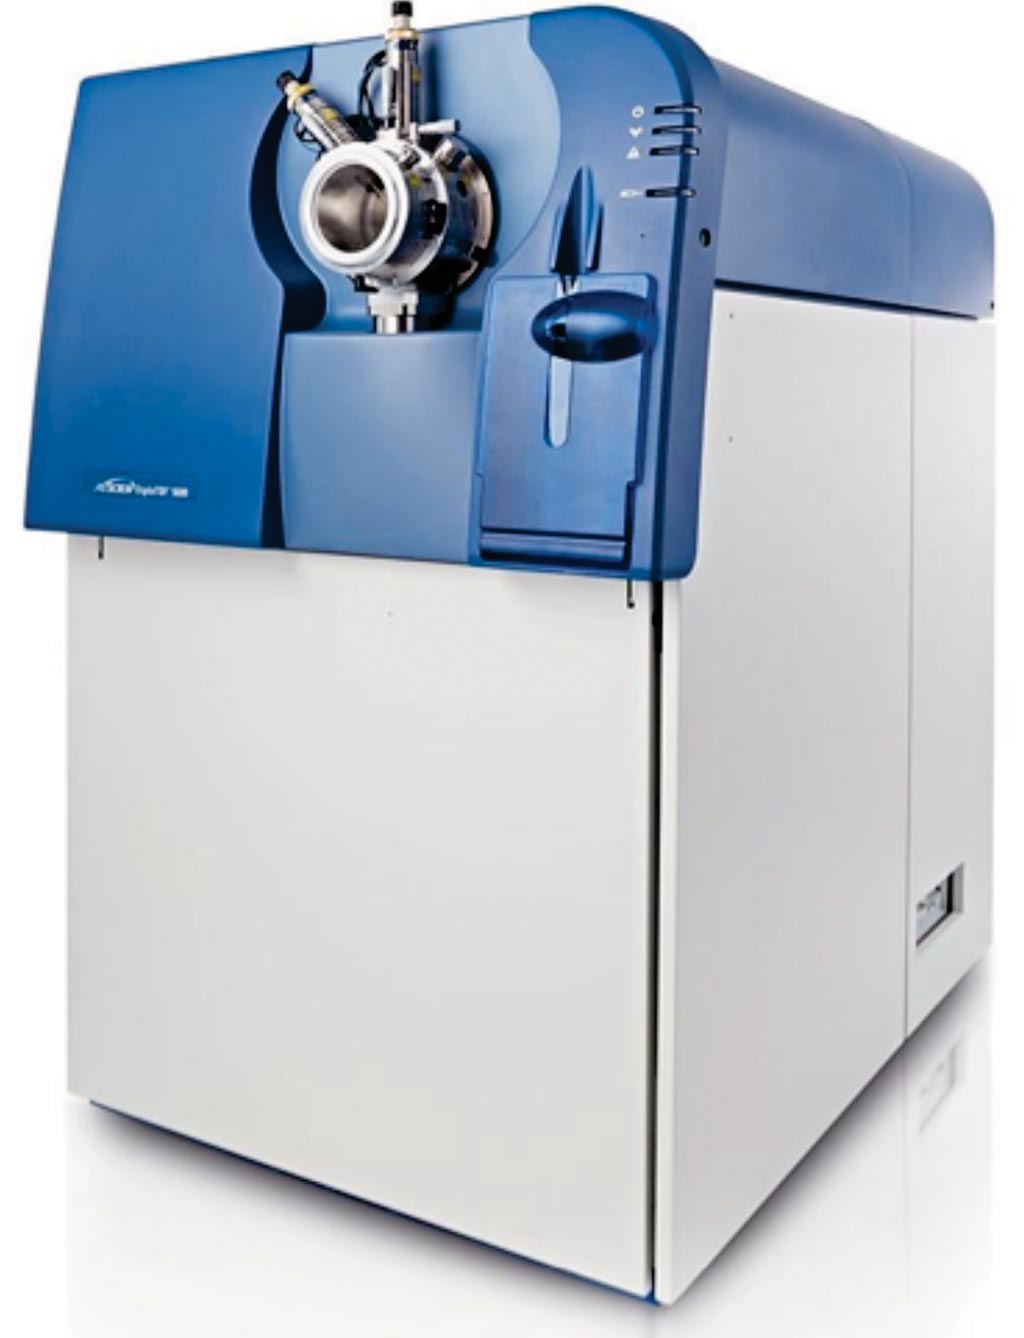 Image: The Triple TOF 5600+ mass spectrometer (Photo courtesy of SCIEX).